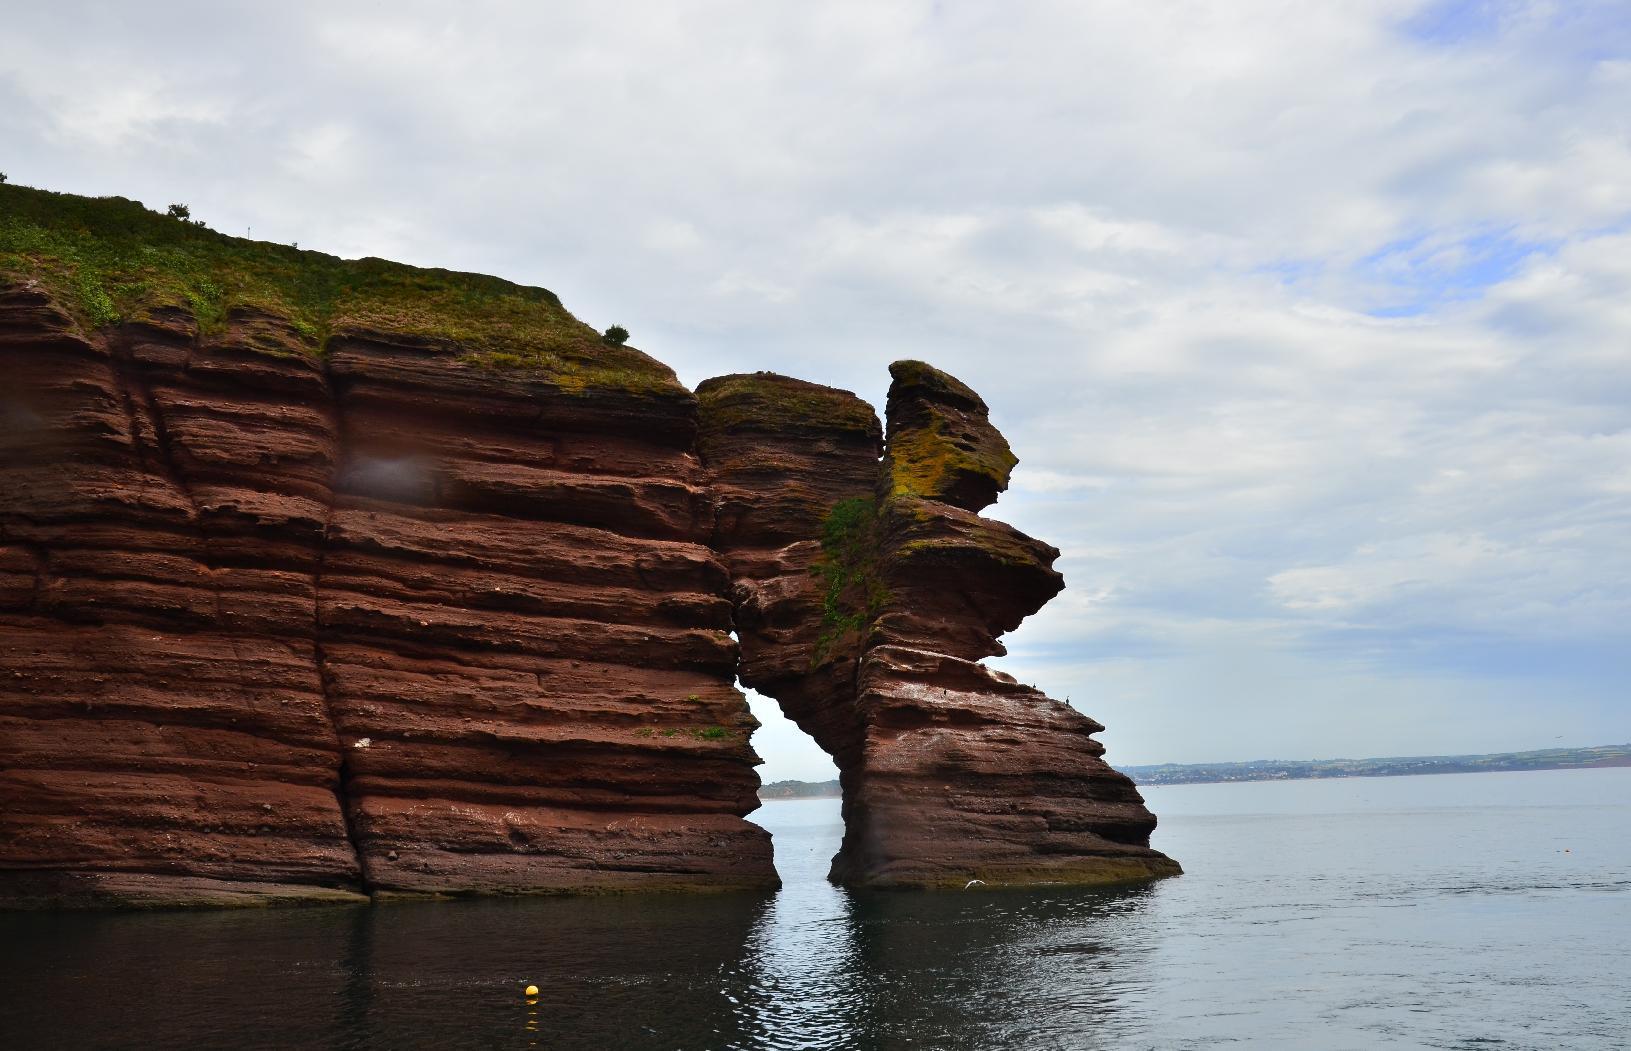 Eroded sandstone cliff with a large void